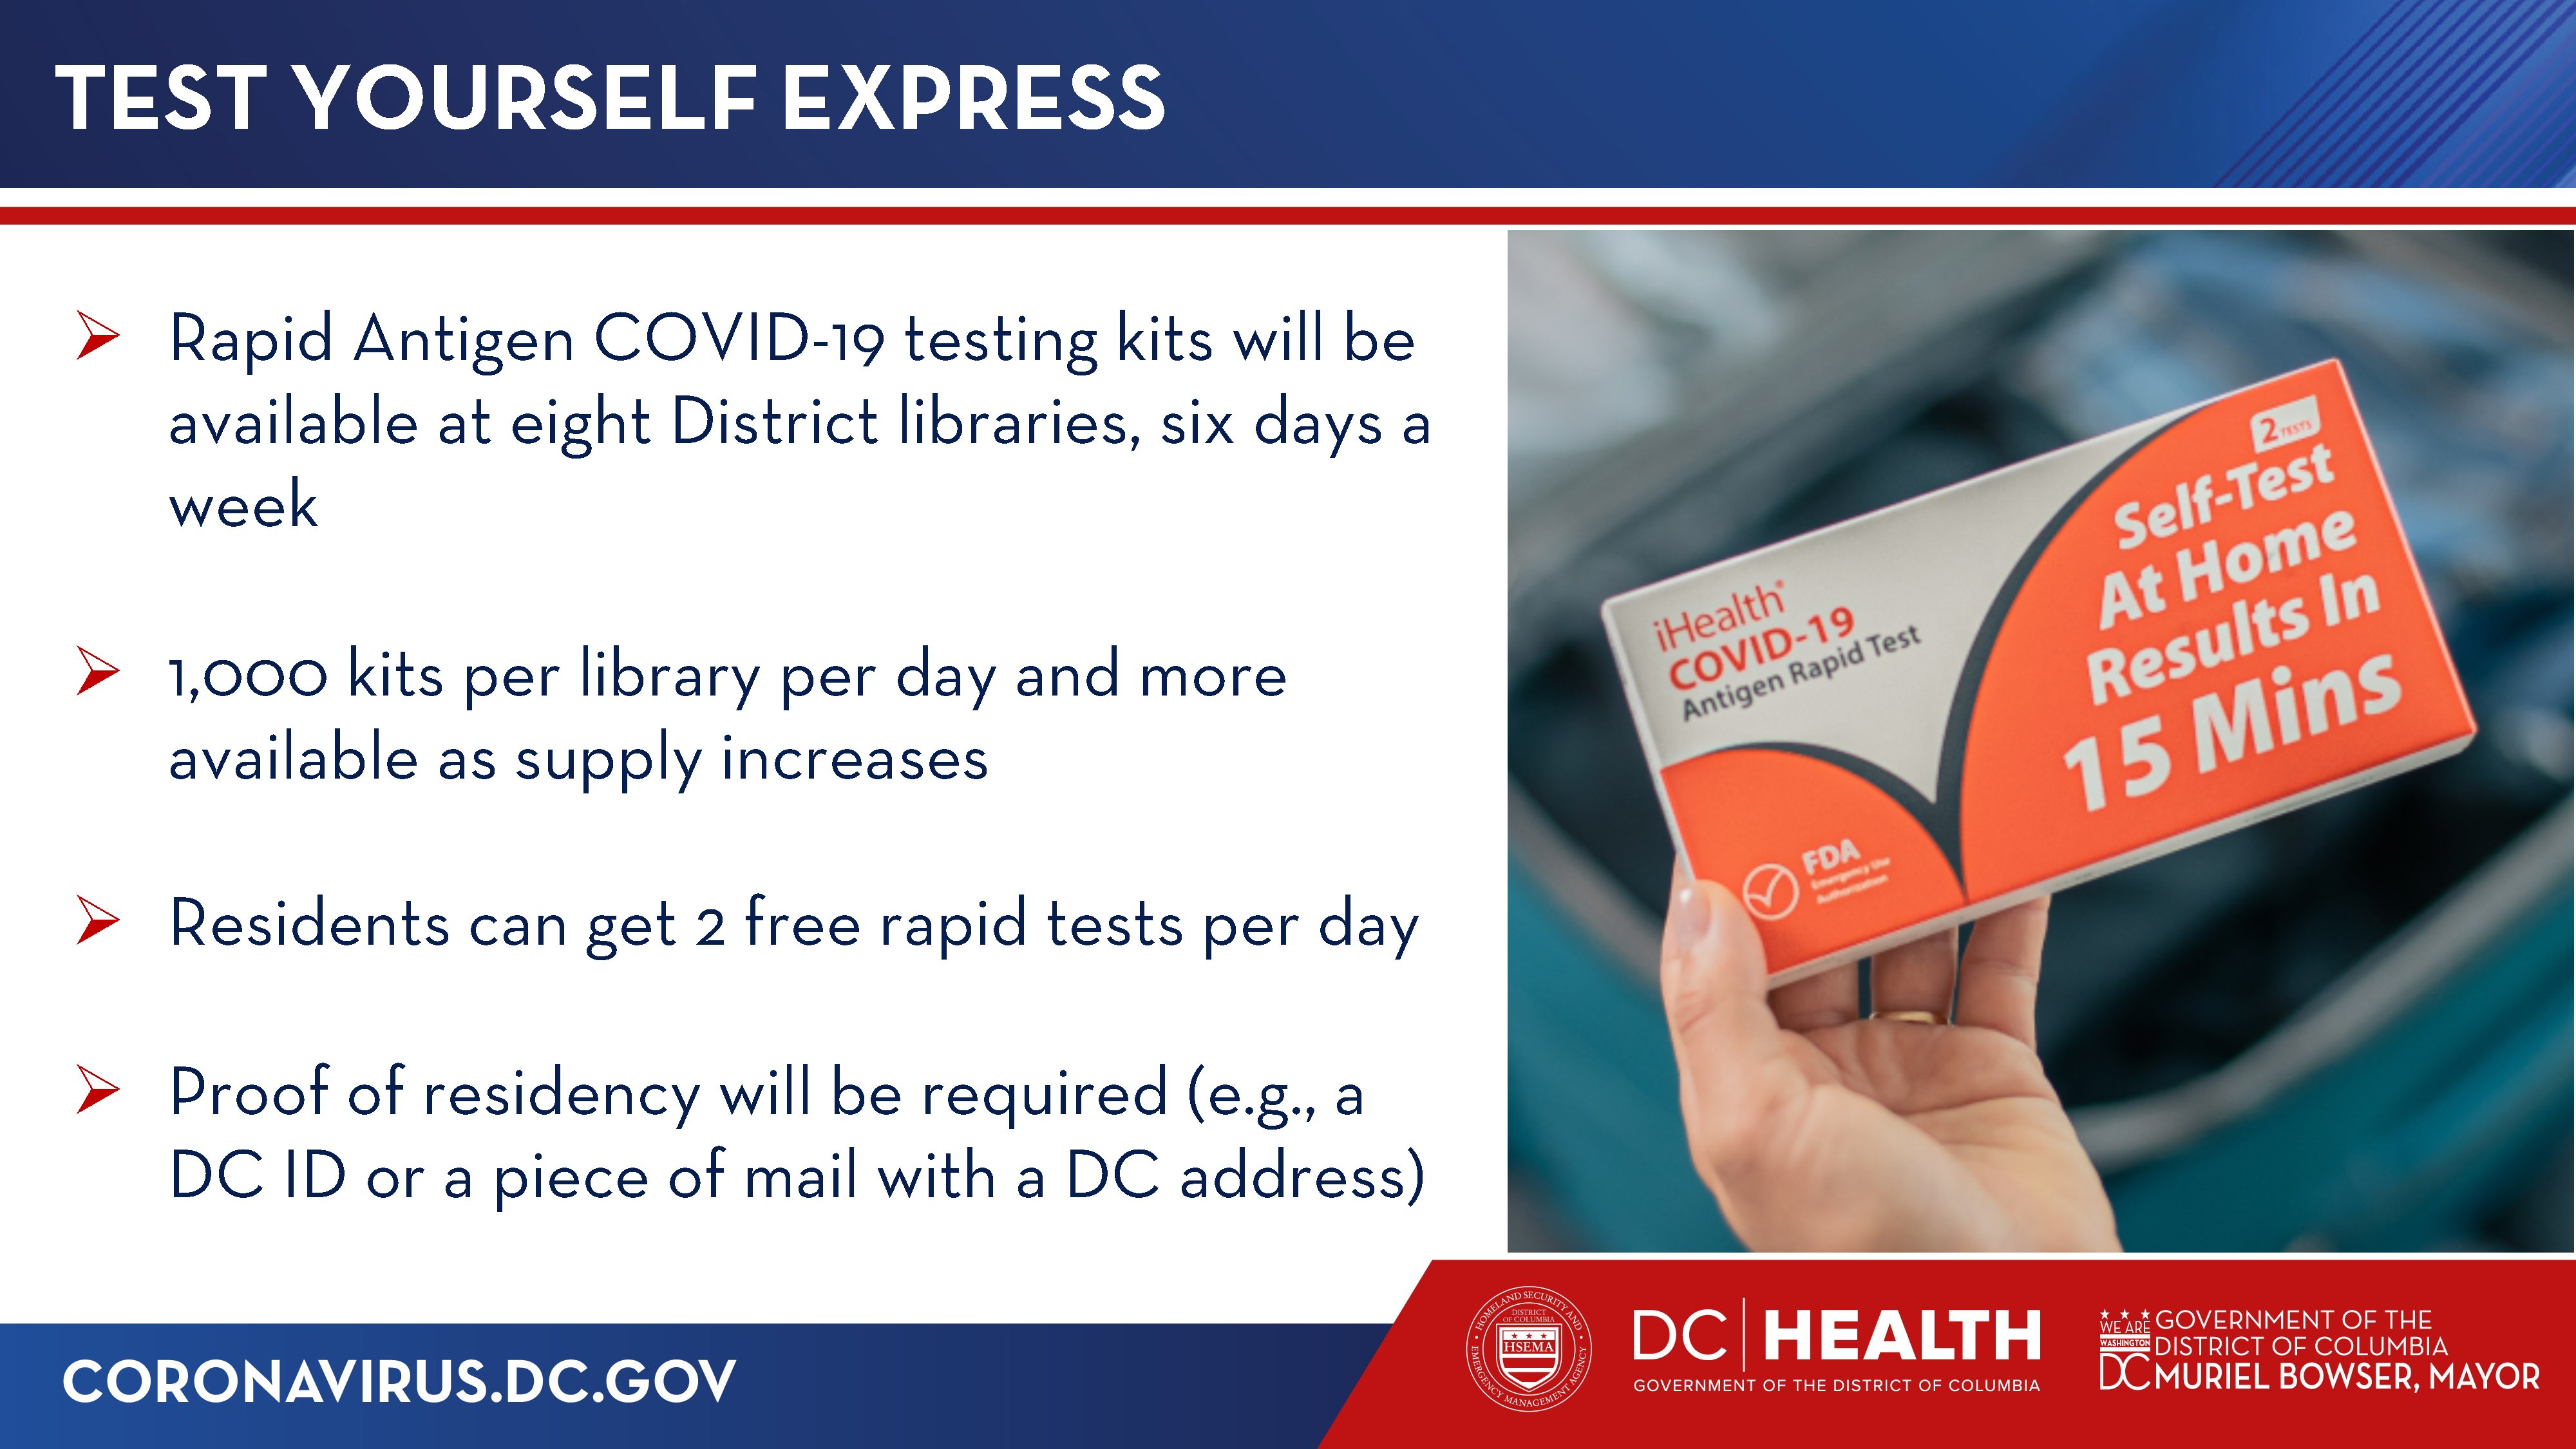 en cualquier momento Peregrino muerto Mayor Muriel Bowser on Twitter: "Residents will be able to pick up free  at-home rapid antigen tests at eight locations across DC.  https://t.co/MrcoDuJVOS" / Twitter